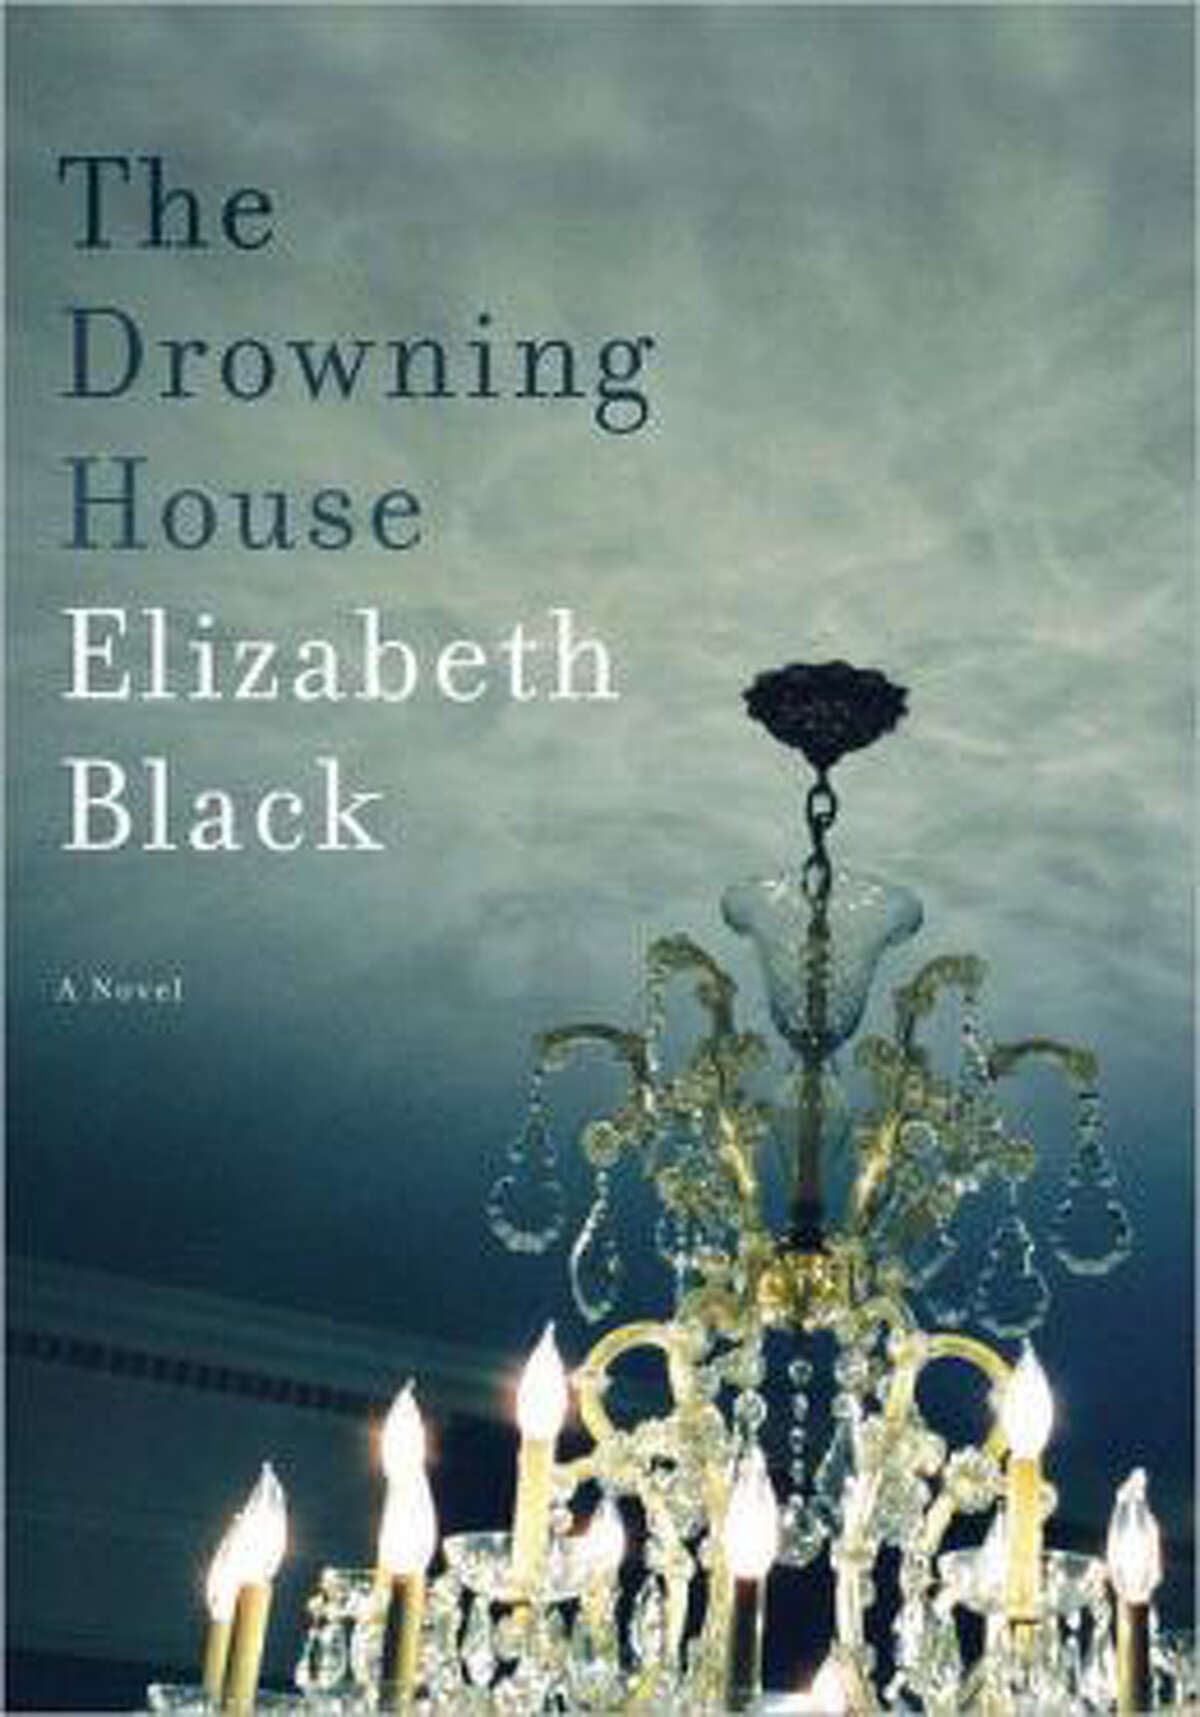 Houston resident Elizabeth Black makes a notable debut with “The Drowning House,” a multigenerational, thrillingly evocative and witty novel that spans the decades between the devastating 1900 Galveston hurricane and the island circa 1990.